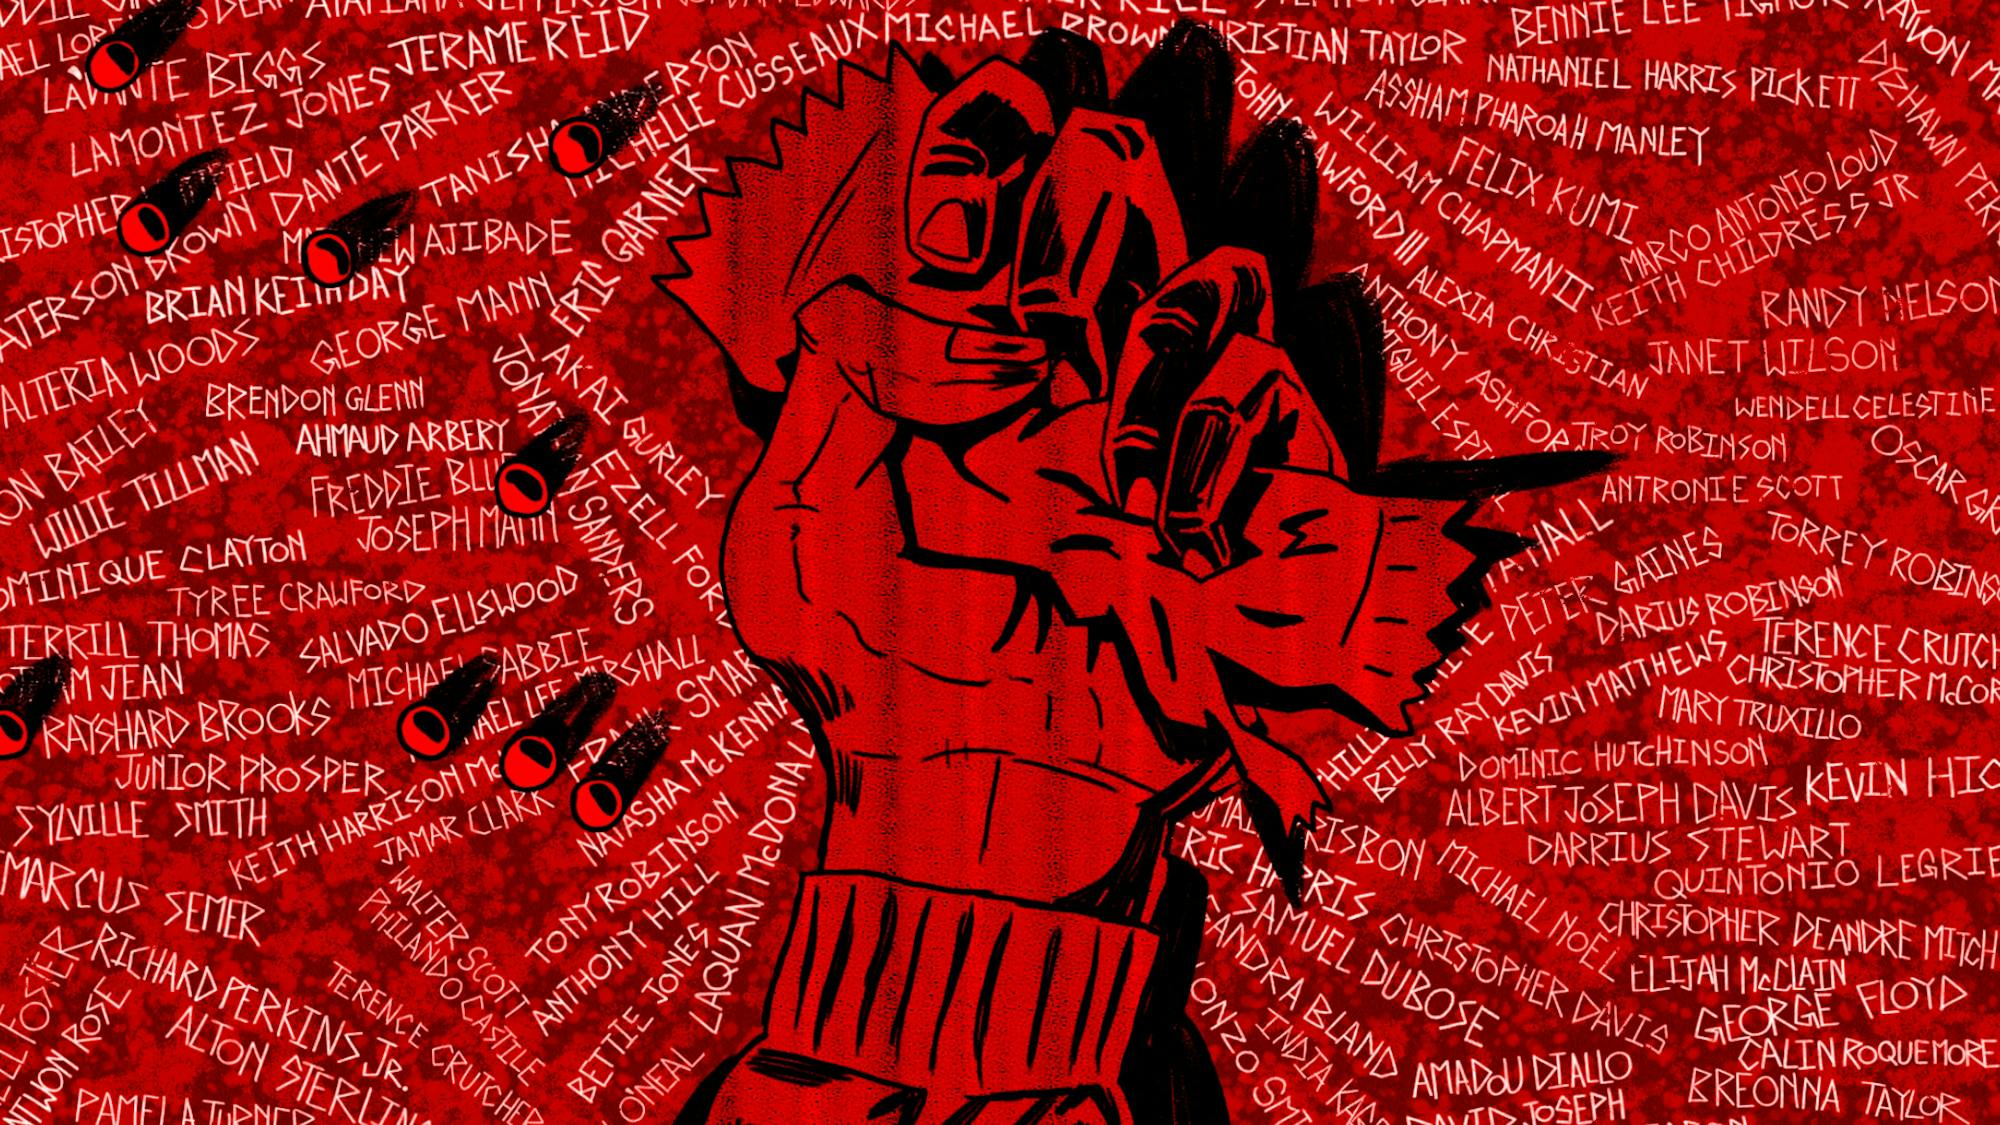 An illustration by Molevule VFX shows a hand grasping a candy wrapper. Candies spill out as the hand hits the ground. The scene is cast in red light. On the sidewalk are etched the names of individuals killed, victims of systemic racism: Eric Garner, Darius Robinson, Keith Harrison McLeod, Breonna Taylor, Willie Tillman, Akai Gurley, Michael Brown, Alteria Woods, Albert Joseph Davis, Ahmaud Arbery, and on and on and on.